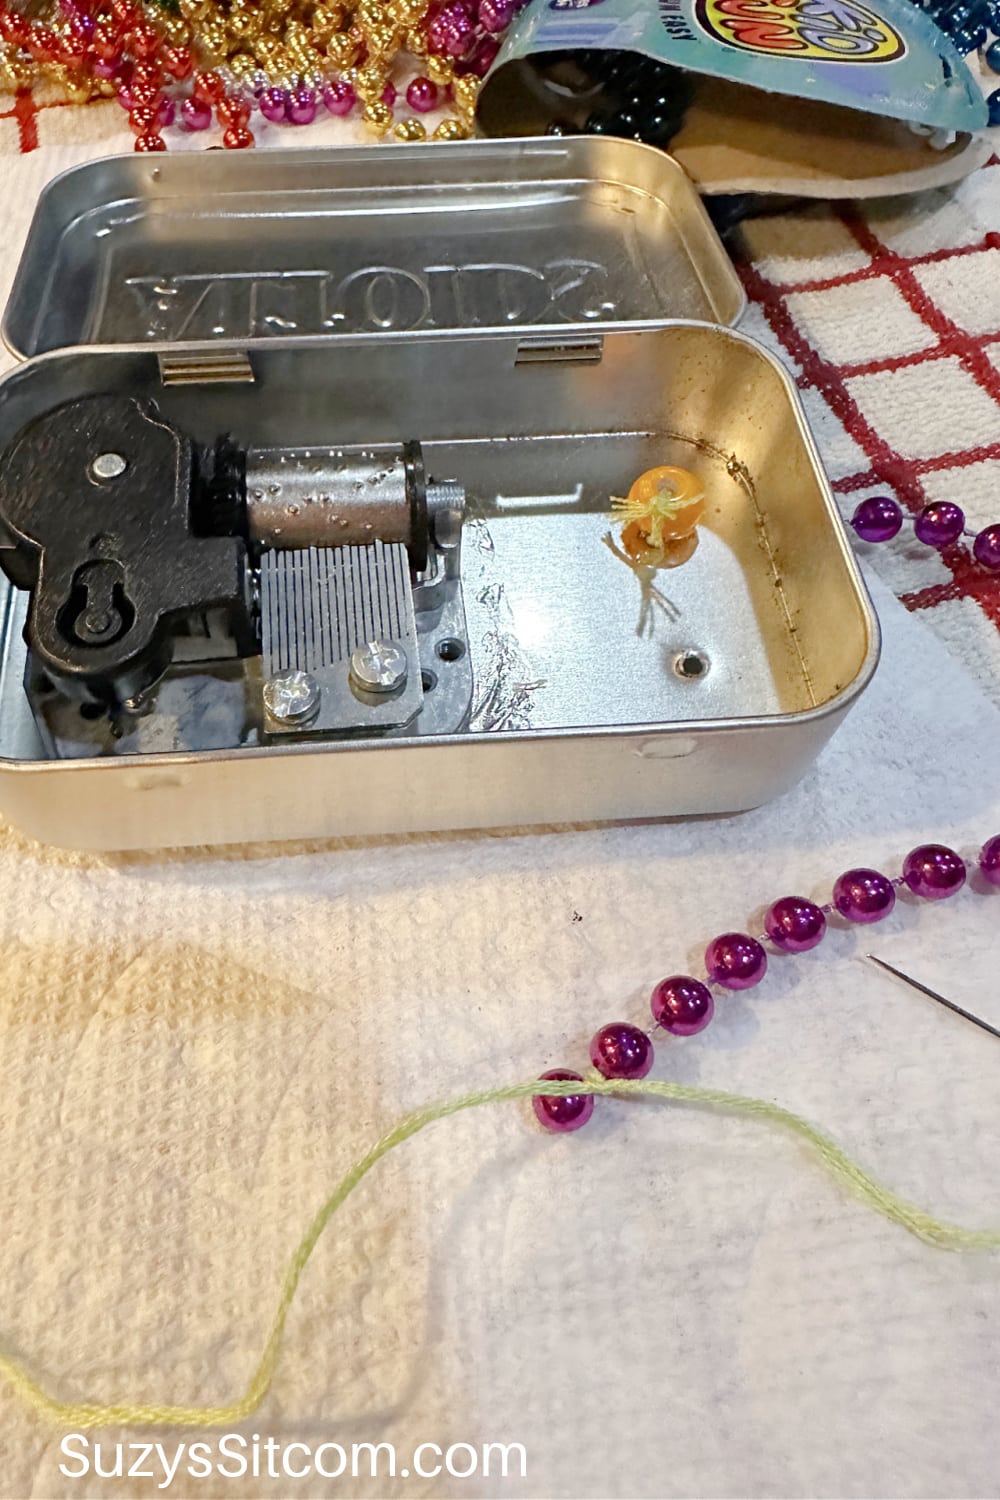 Adding bead necklaces to the music box